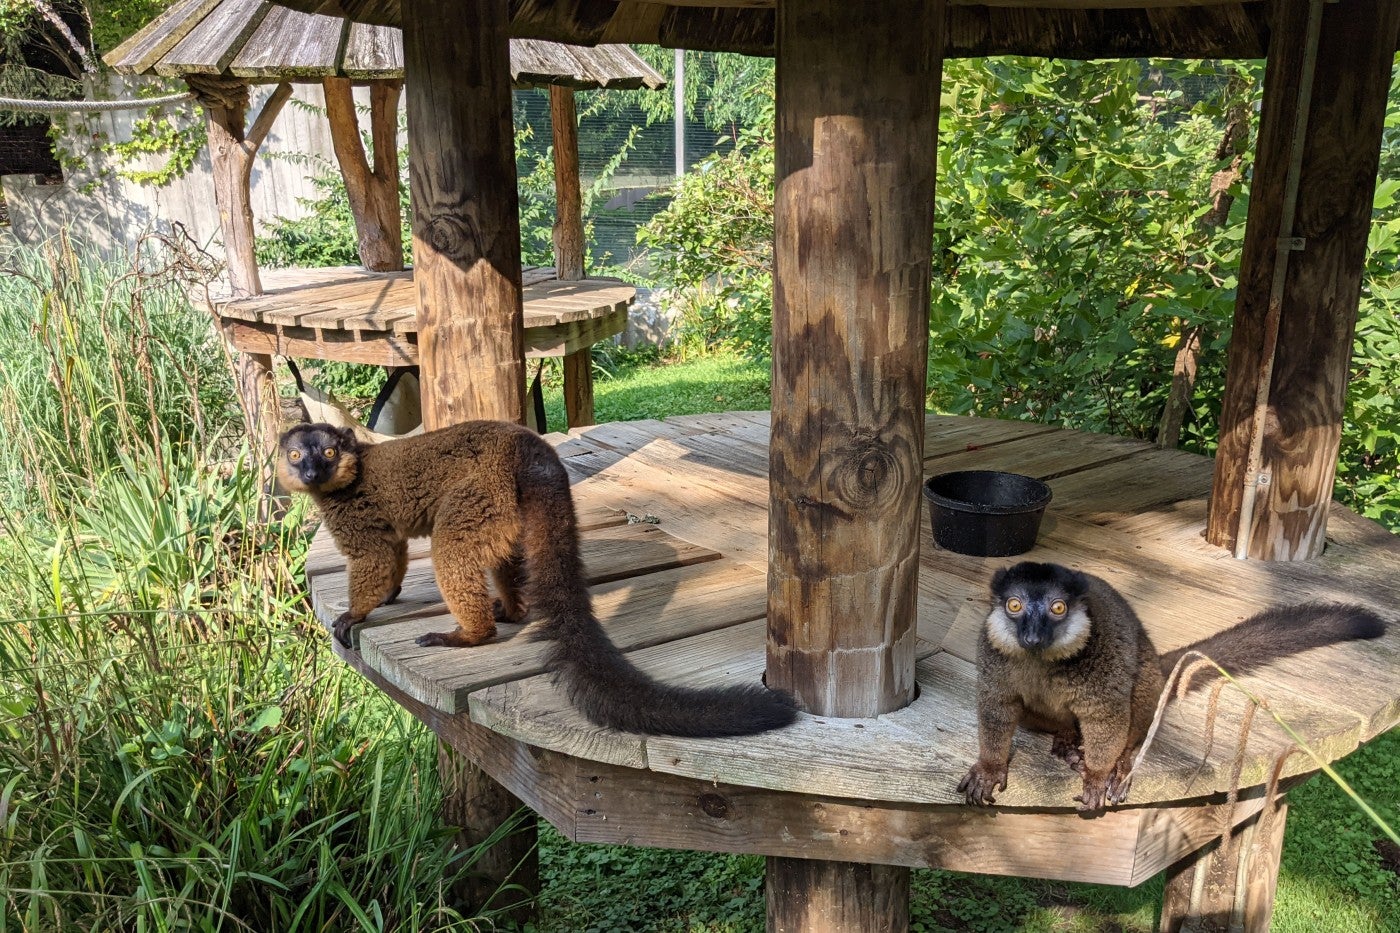 Collared lemur brothers Bentley (left) and Beemer (right) sit in a wooden hut in their outdoor habtat.